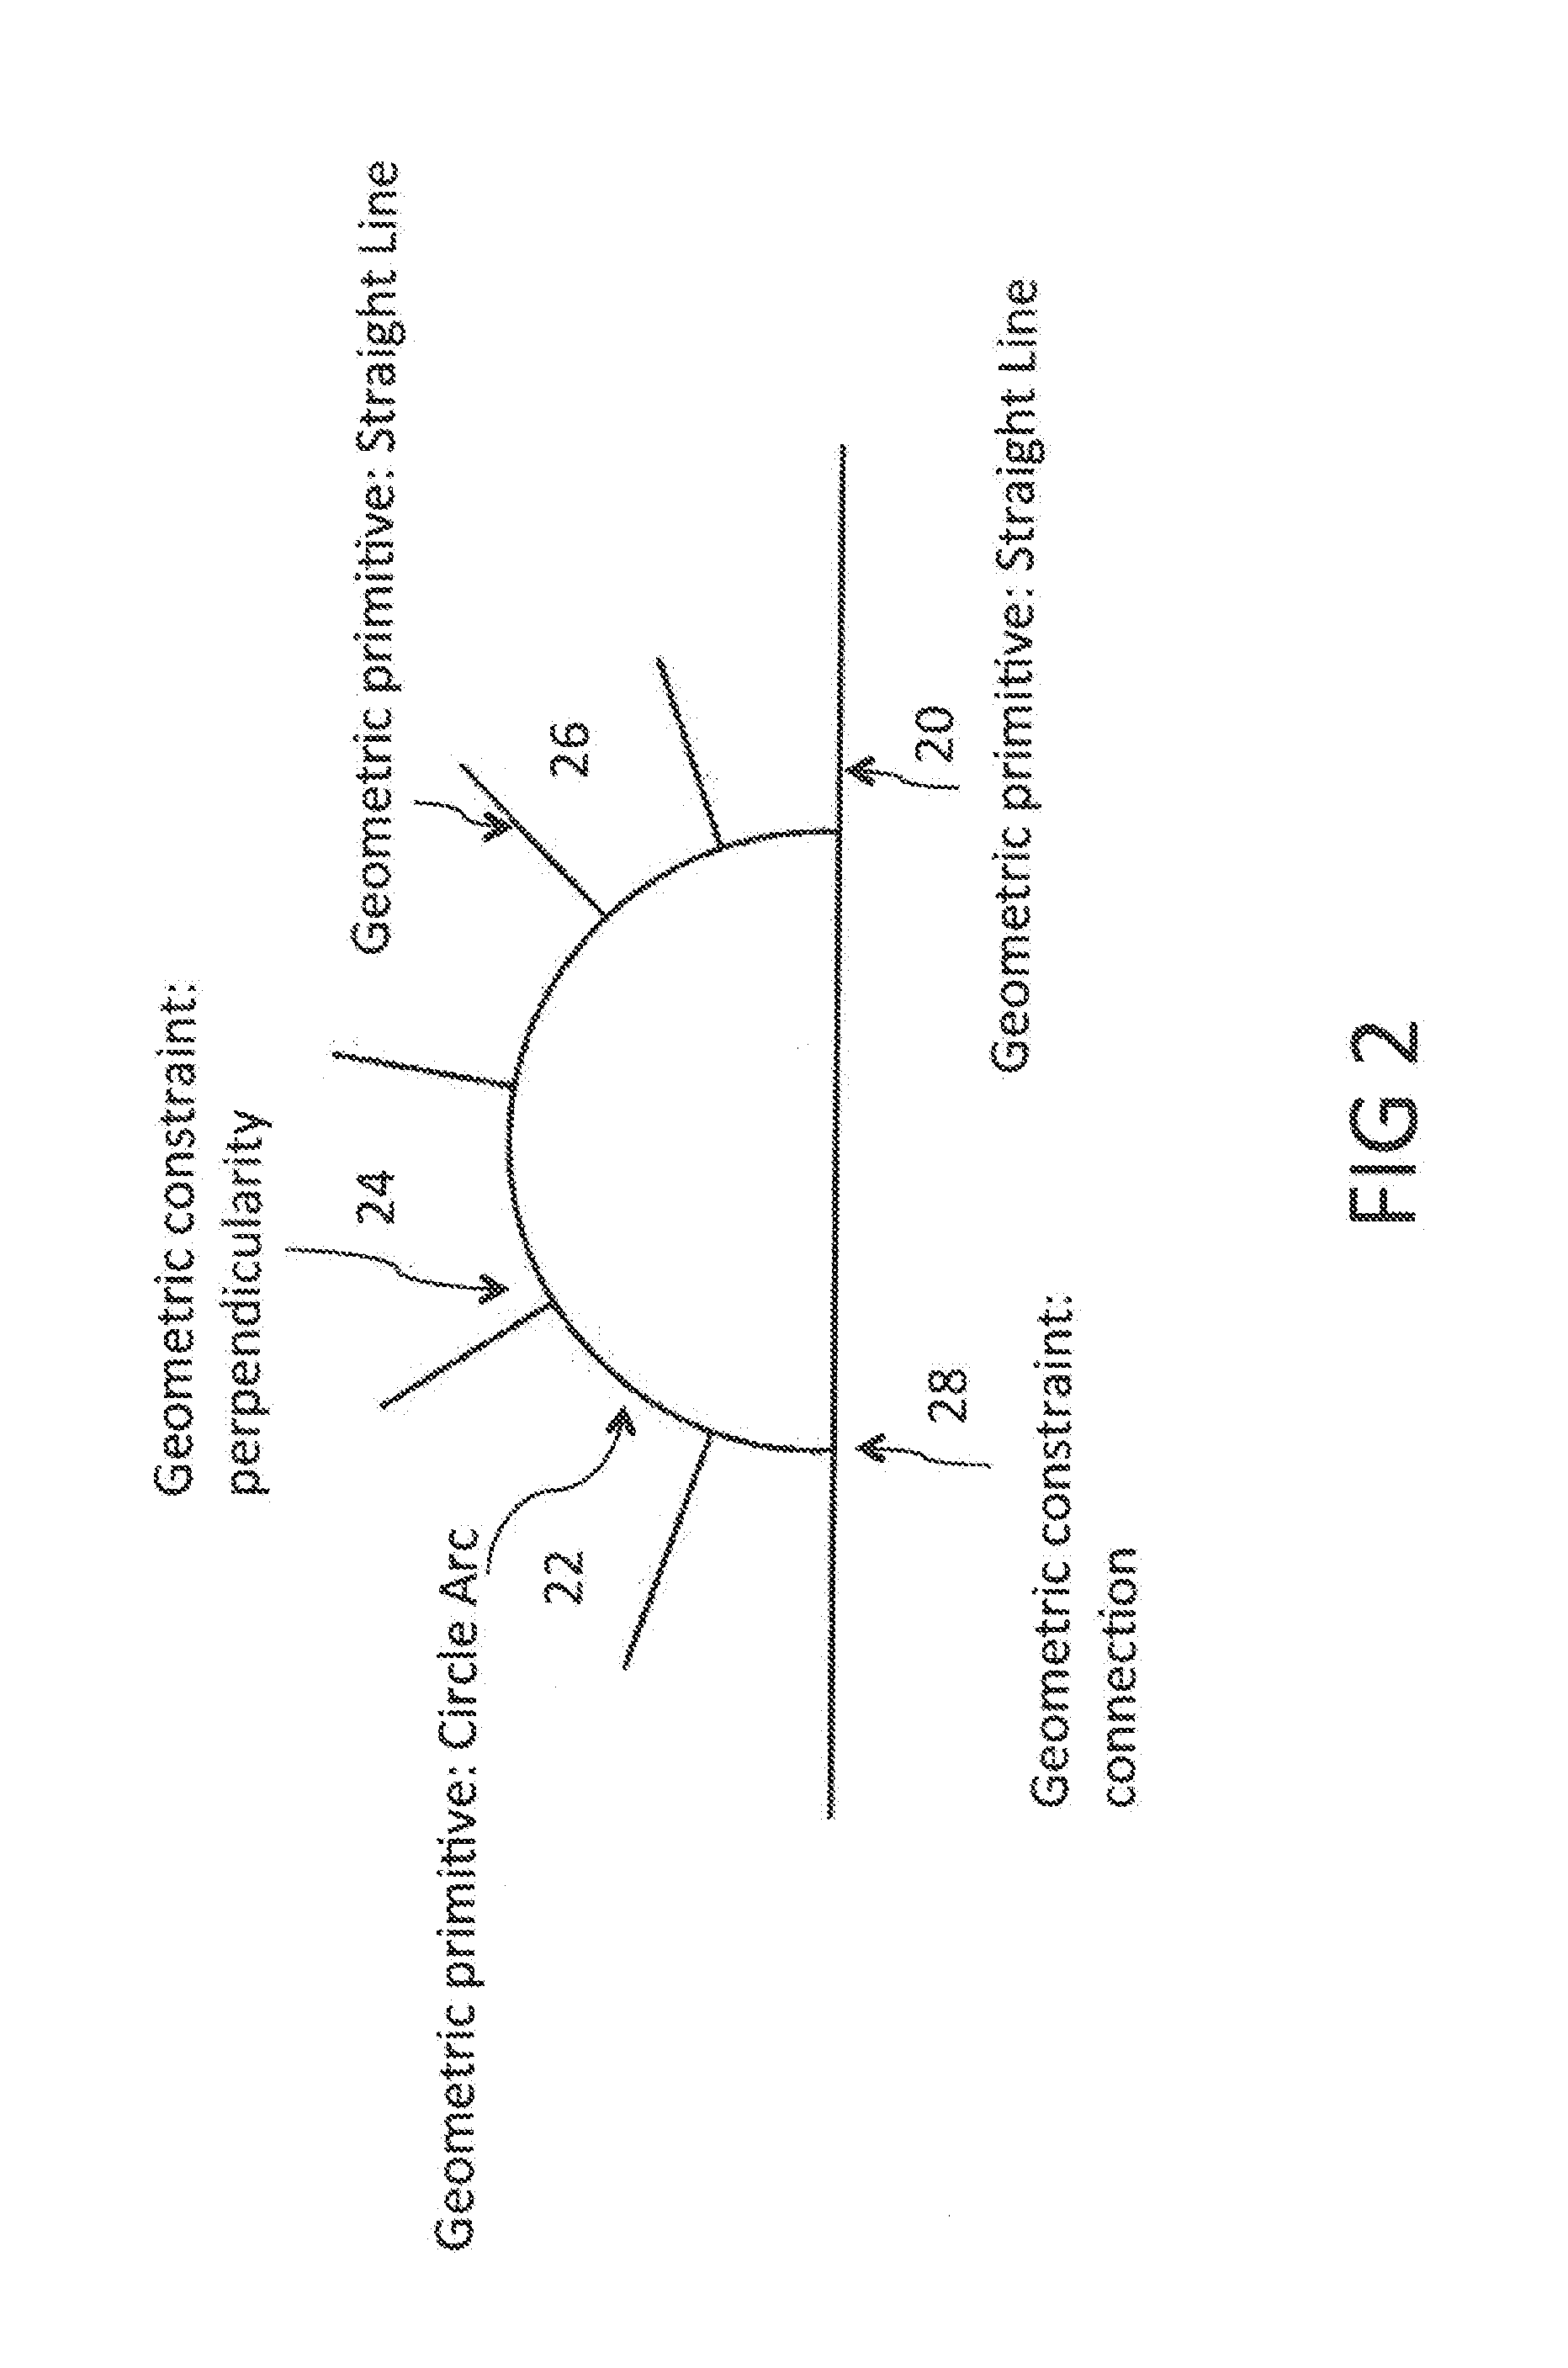 System and Method for Interactive Sketch Recognition Based on Geometric Contraints